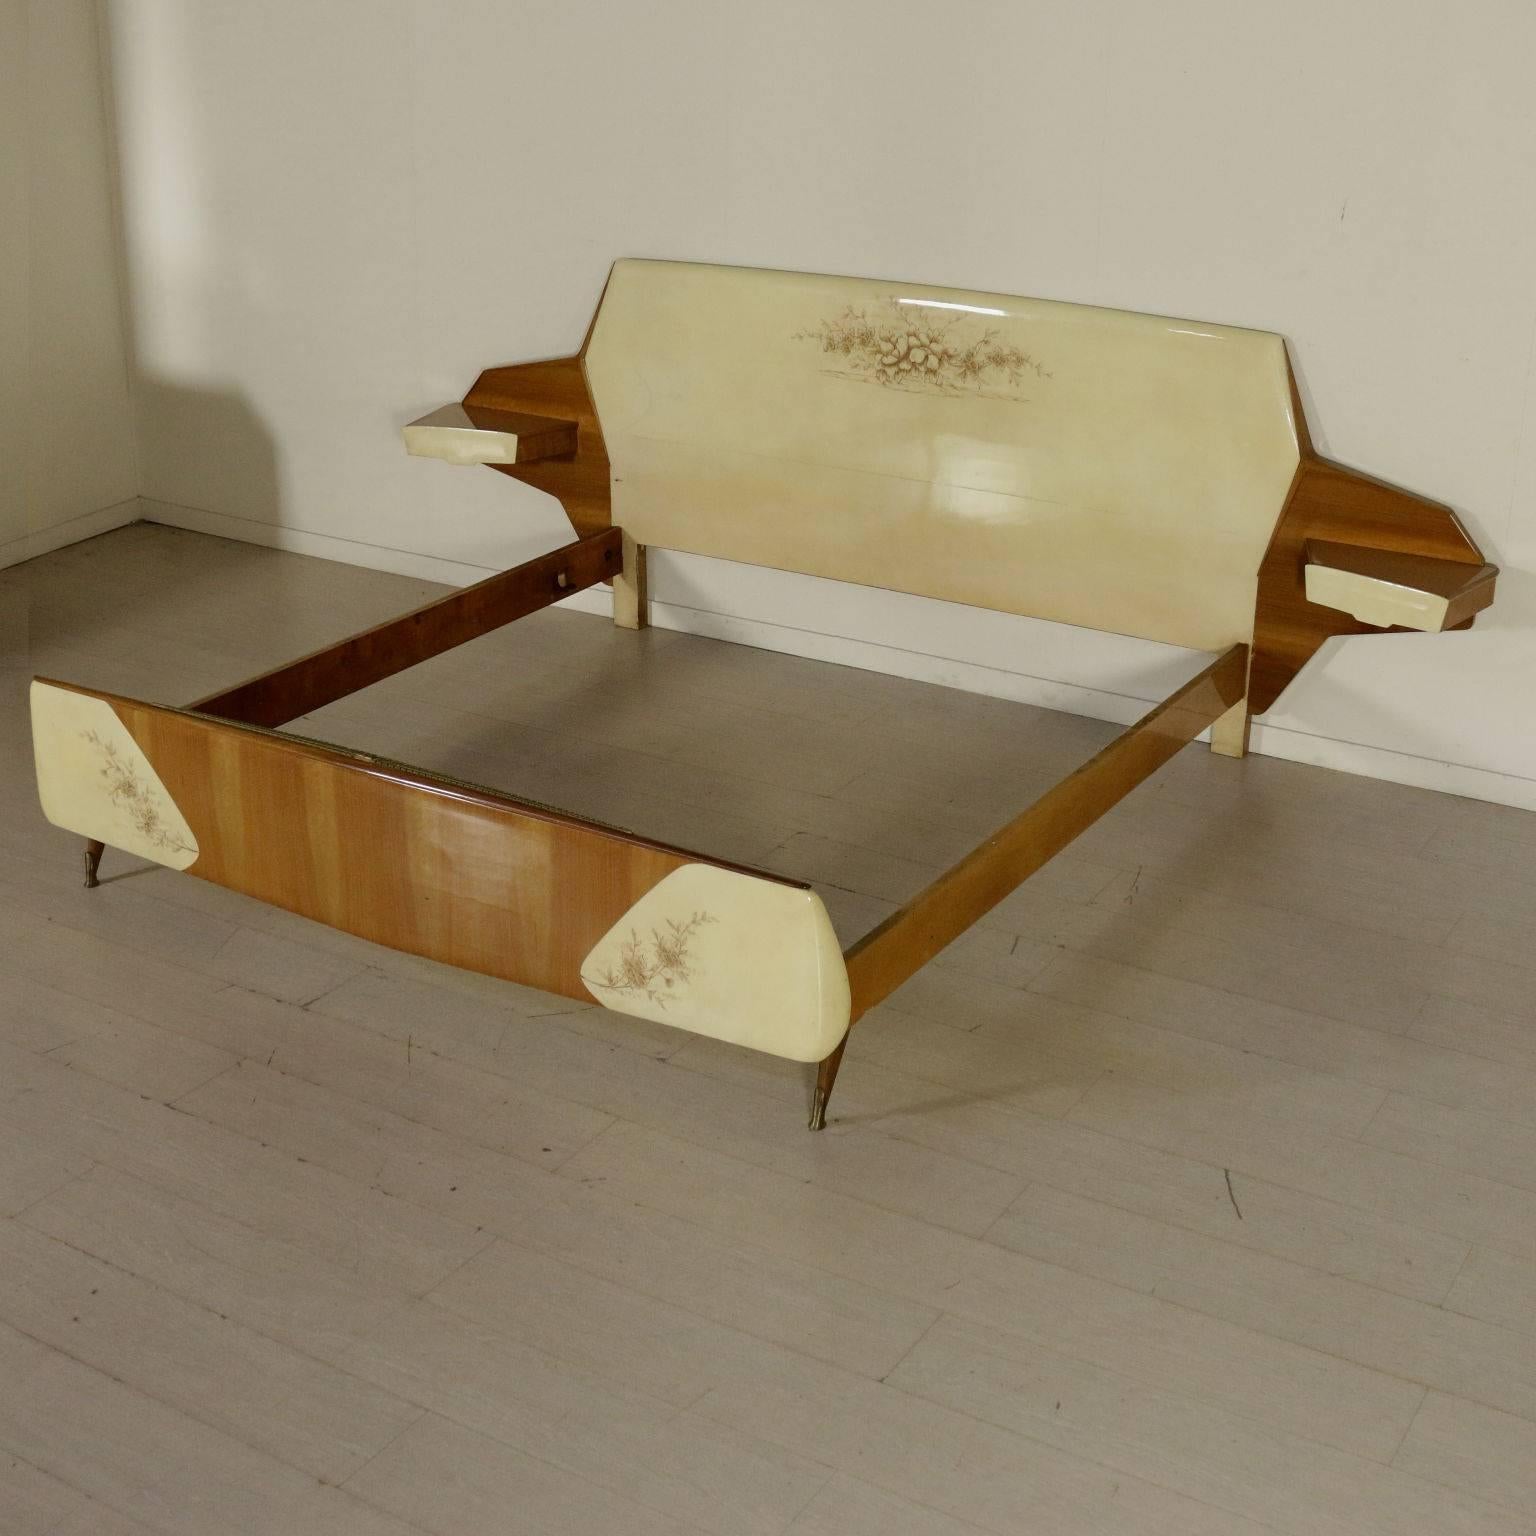 A double bed with hanging bedside tables, mahogany veneer and lacquered with flower drawings, retro treated glass. Manufactured in Italy, 1950s-1960s.